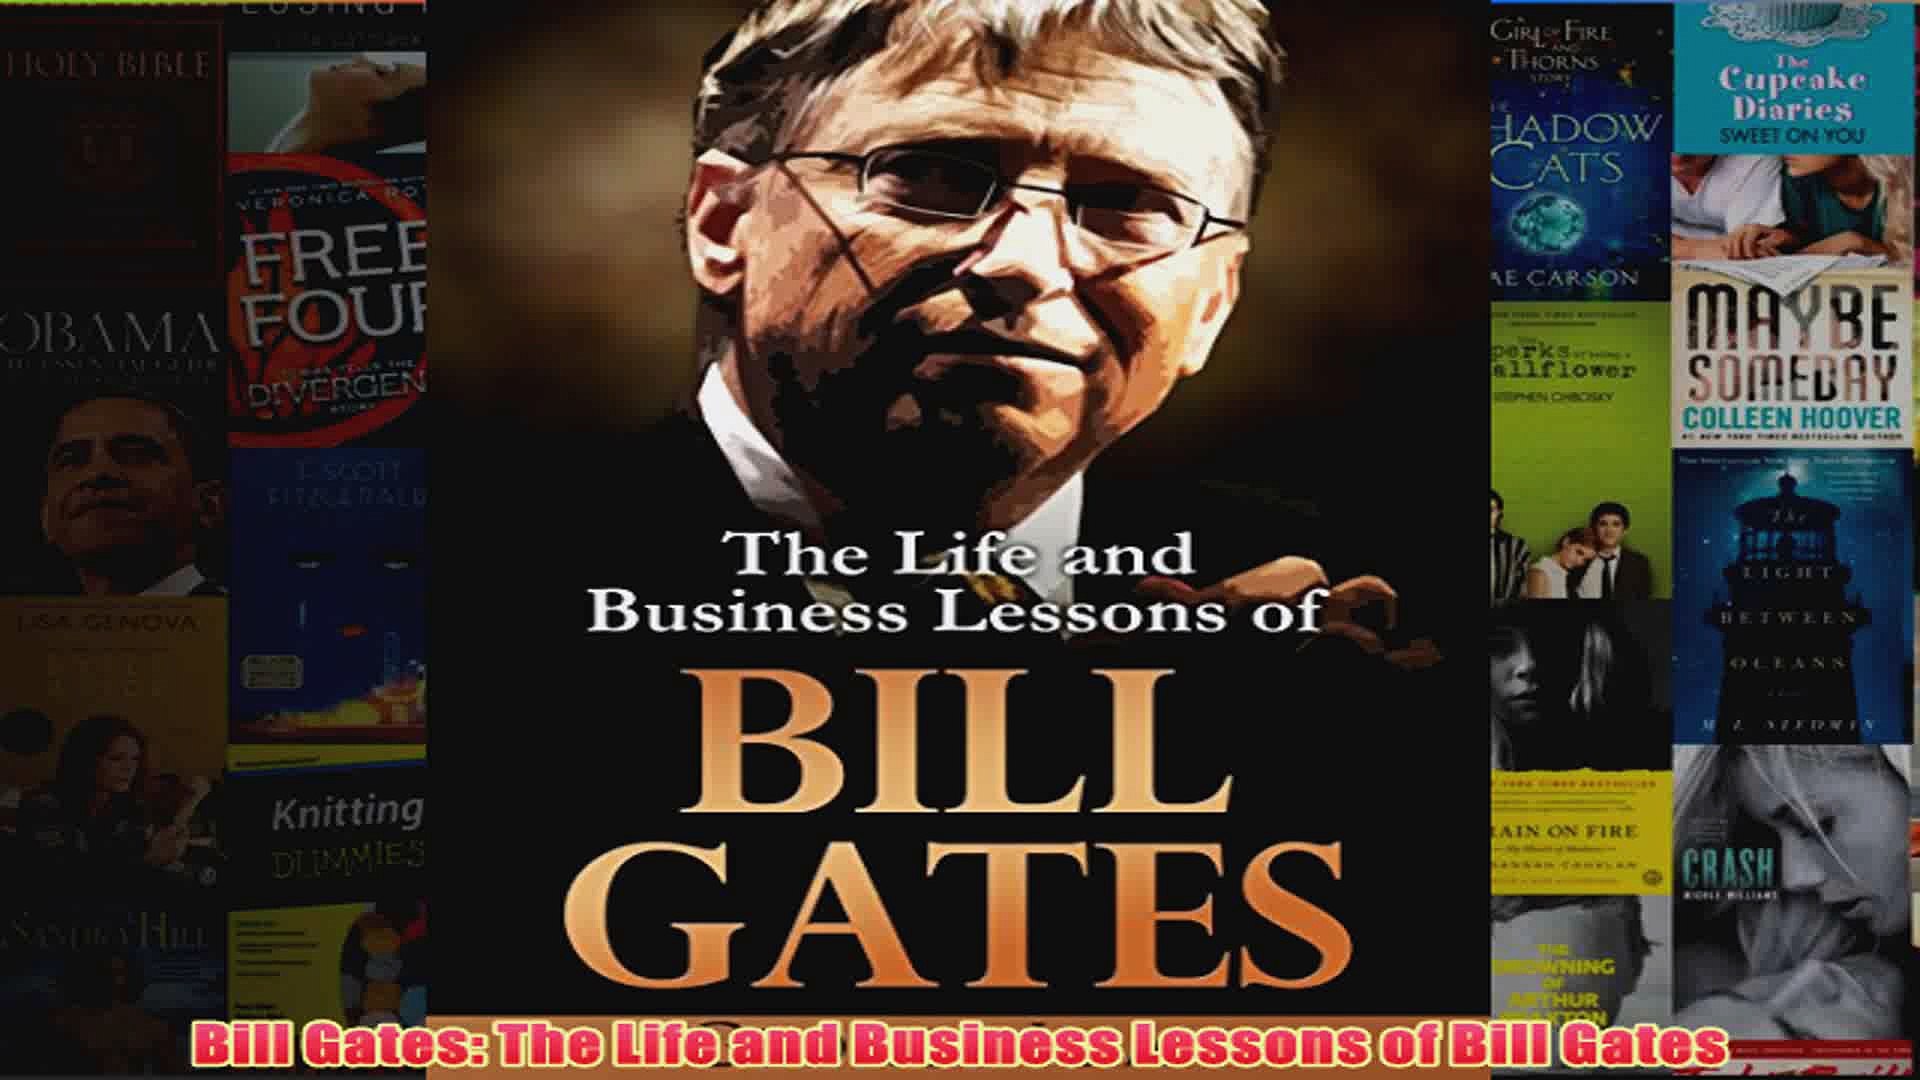 Bill Gates The Life and Business Lessons of Bill Gates